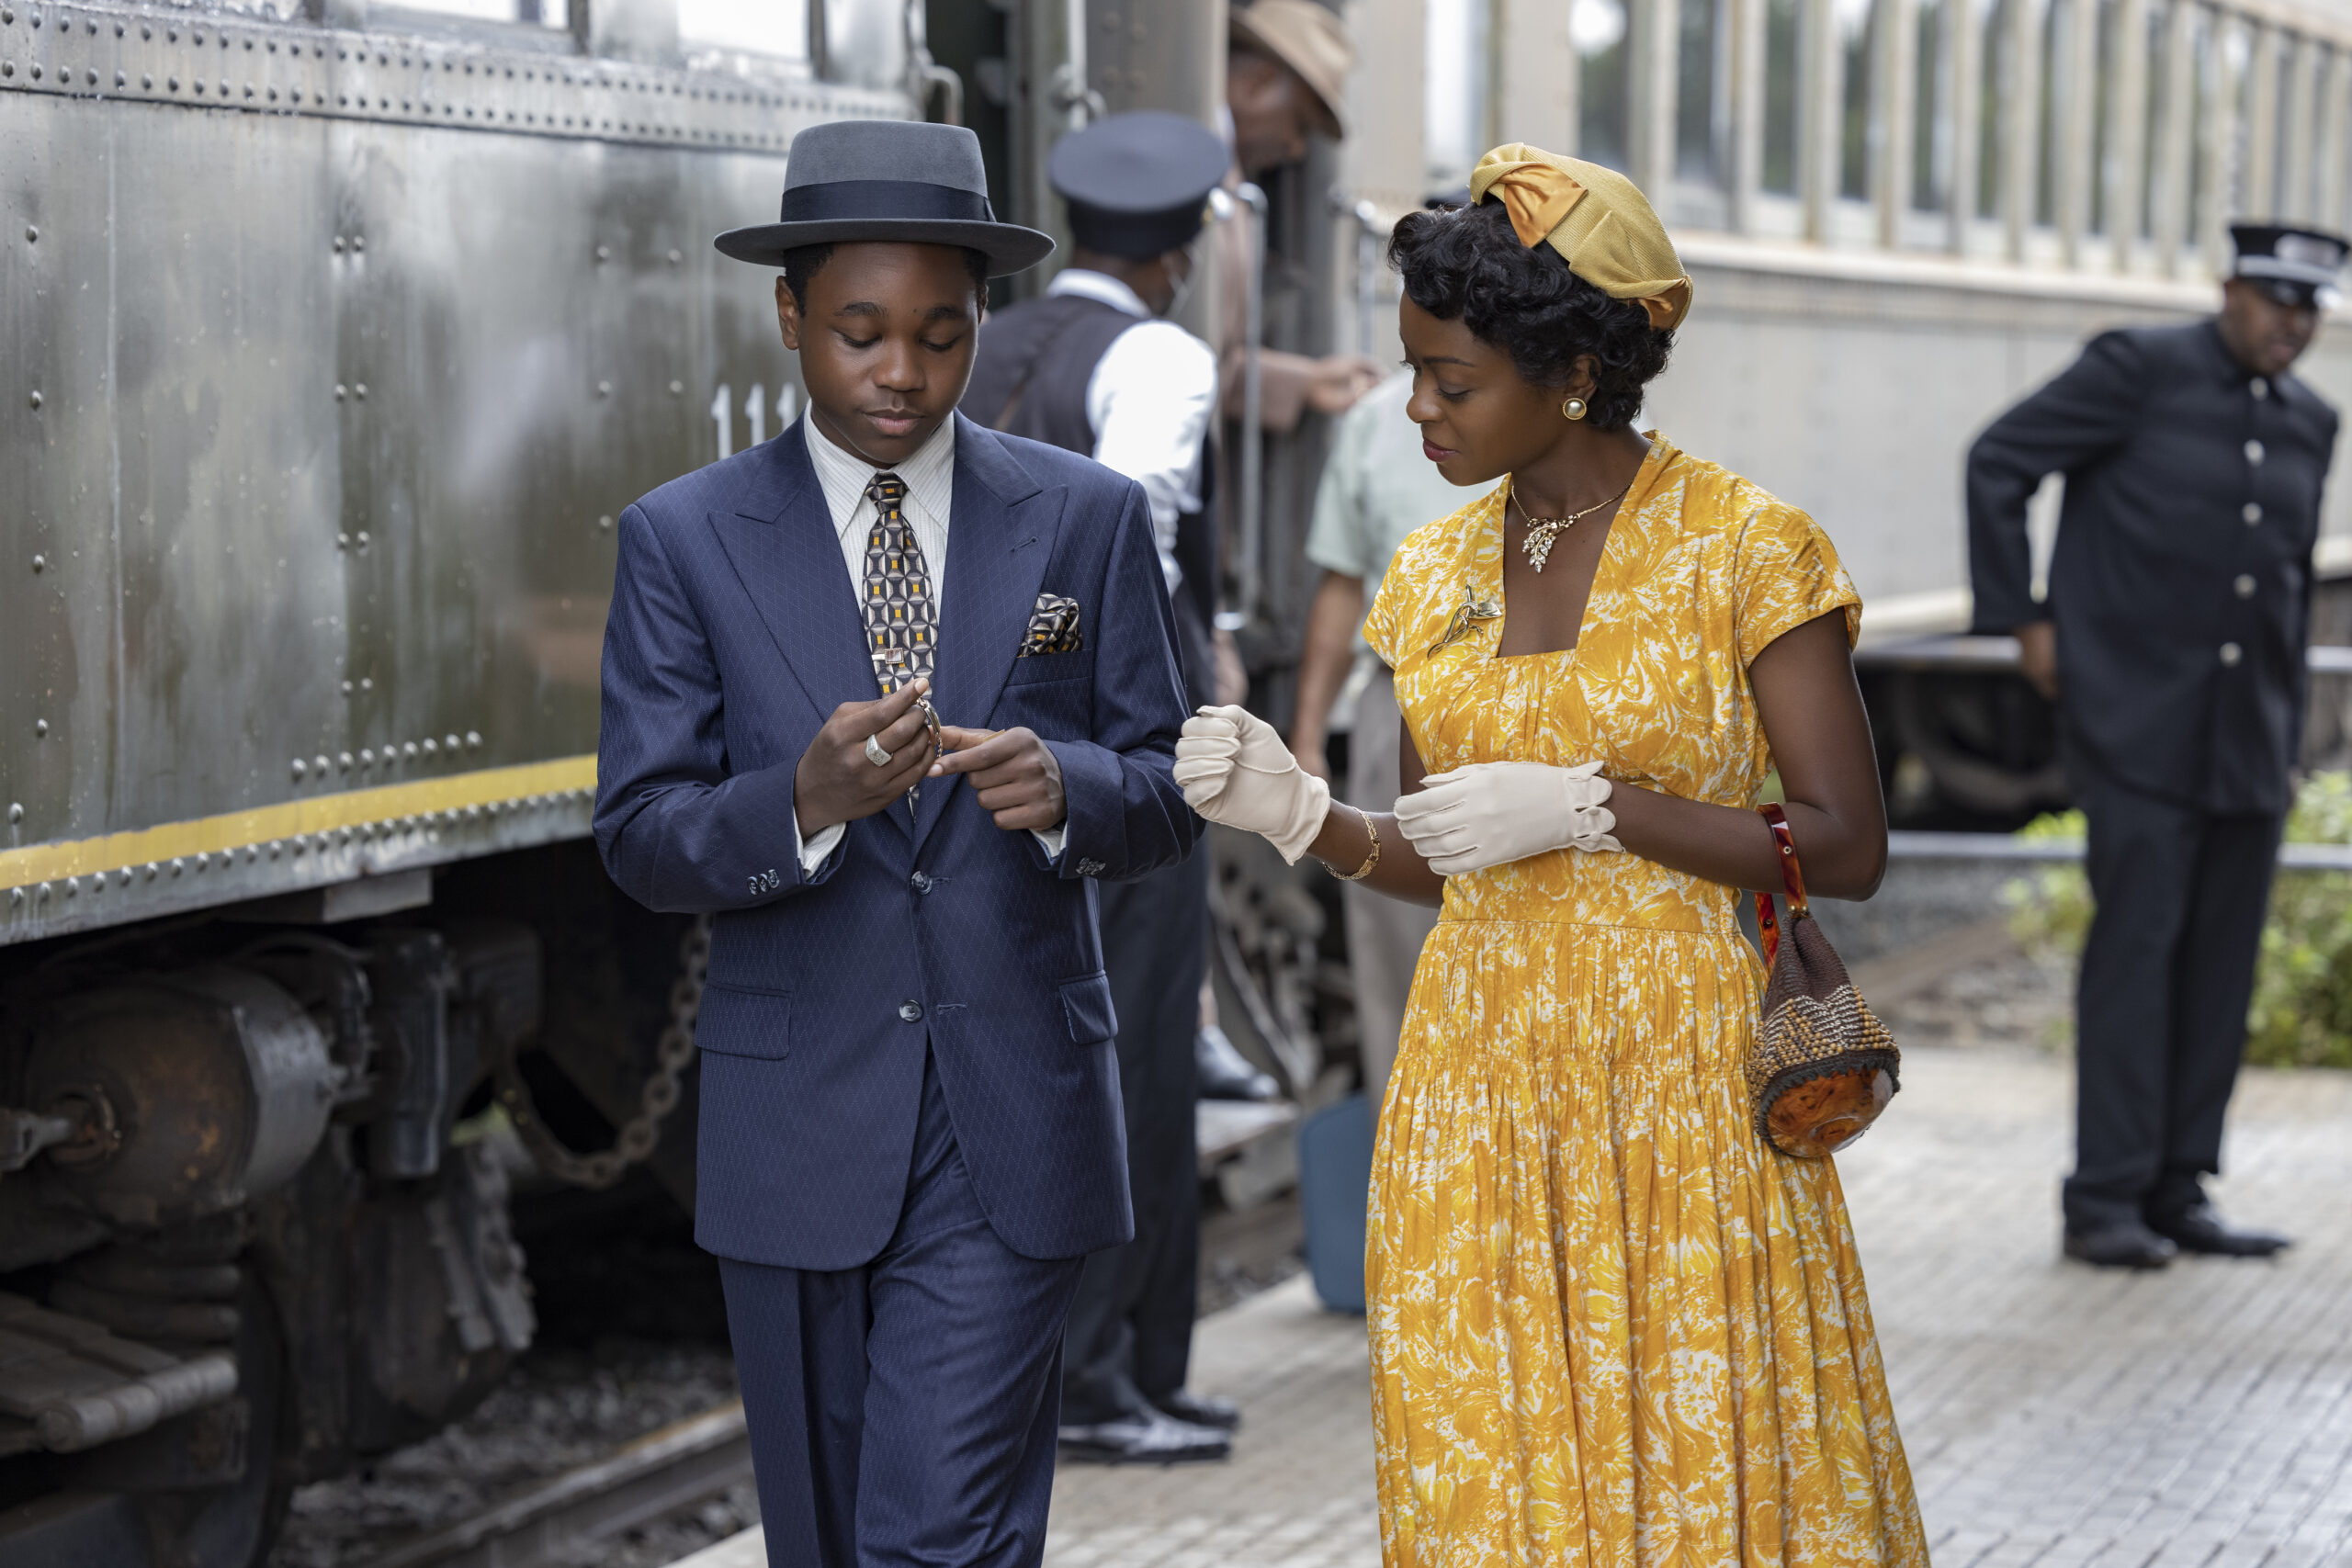 Jalyn Hall as Emmett Till and Danielle Deadwyler as Mamie Till Bradley in a scene from 'TILL.' They are standing on a train platform next to a train that's pulled into the station. Emmett is in a dark blue suit and hat looking down at a watch in his hands as he walks. Mamie is in a bright yellow and white floral print dress and a yellow hat. She has short hair that's set in waves. She's looking at what her son is doing with the watch. She's wearing white gloves and has a small purse hanging from one arm. There are train employees in the background.